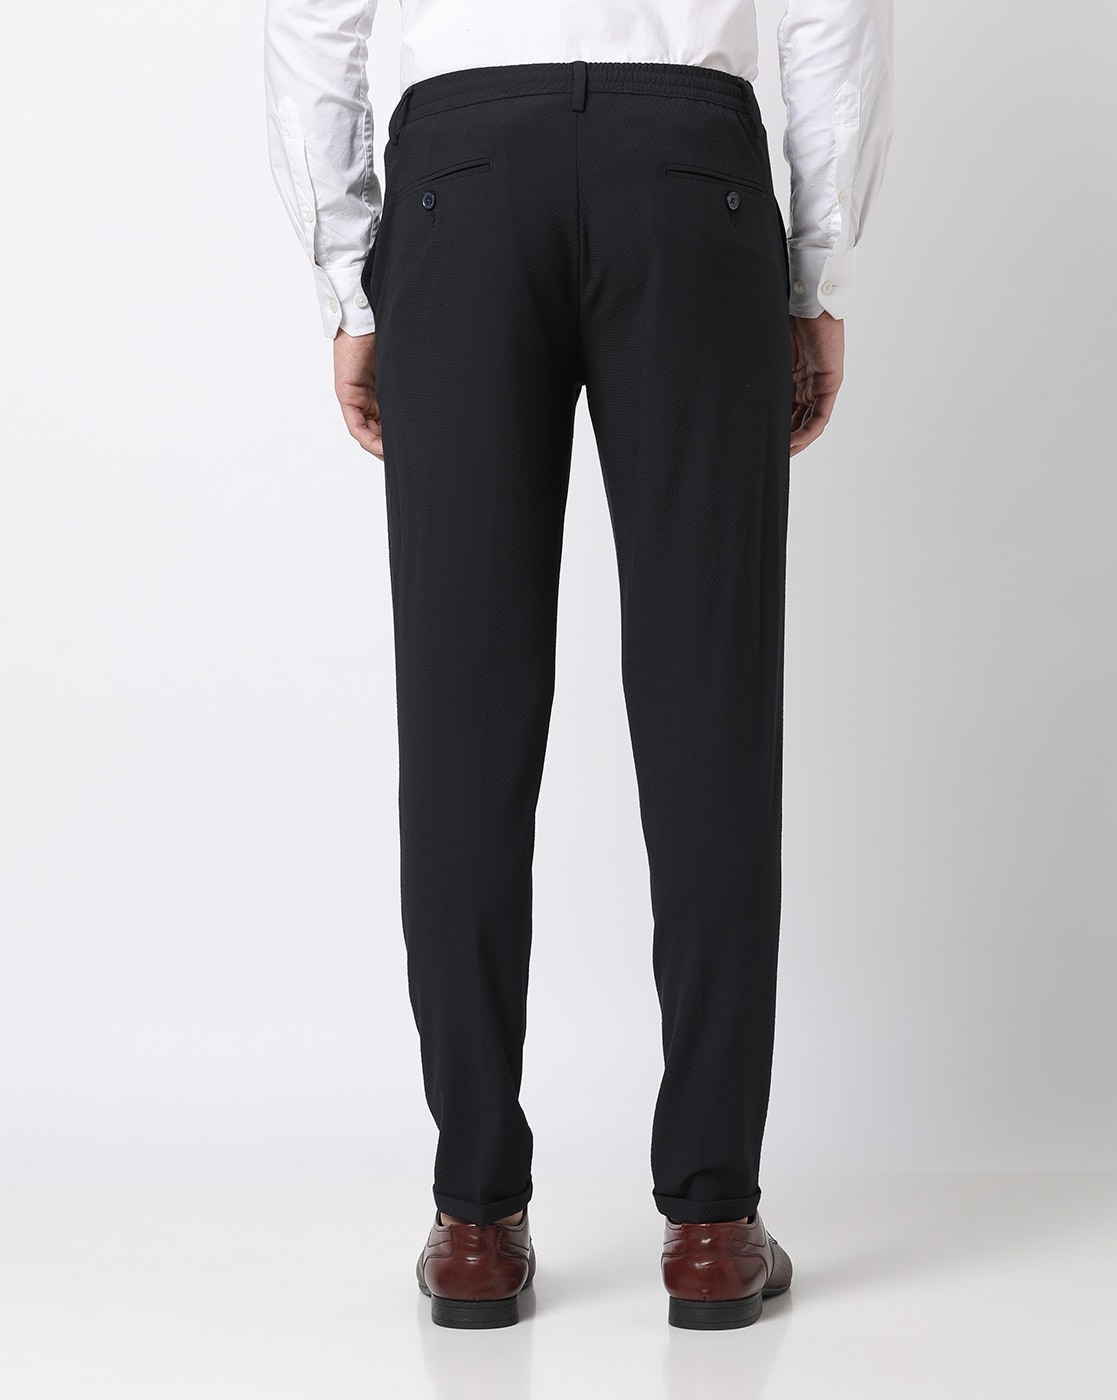 Buy Black Slim Fit Dress Pants by GentWithcom with Free Shipping